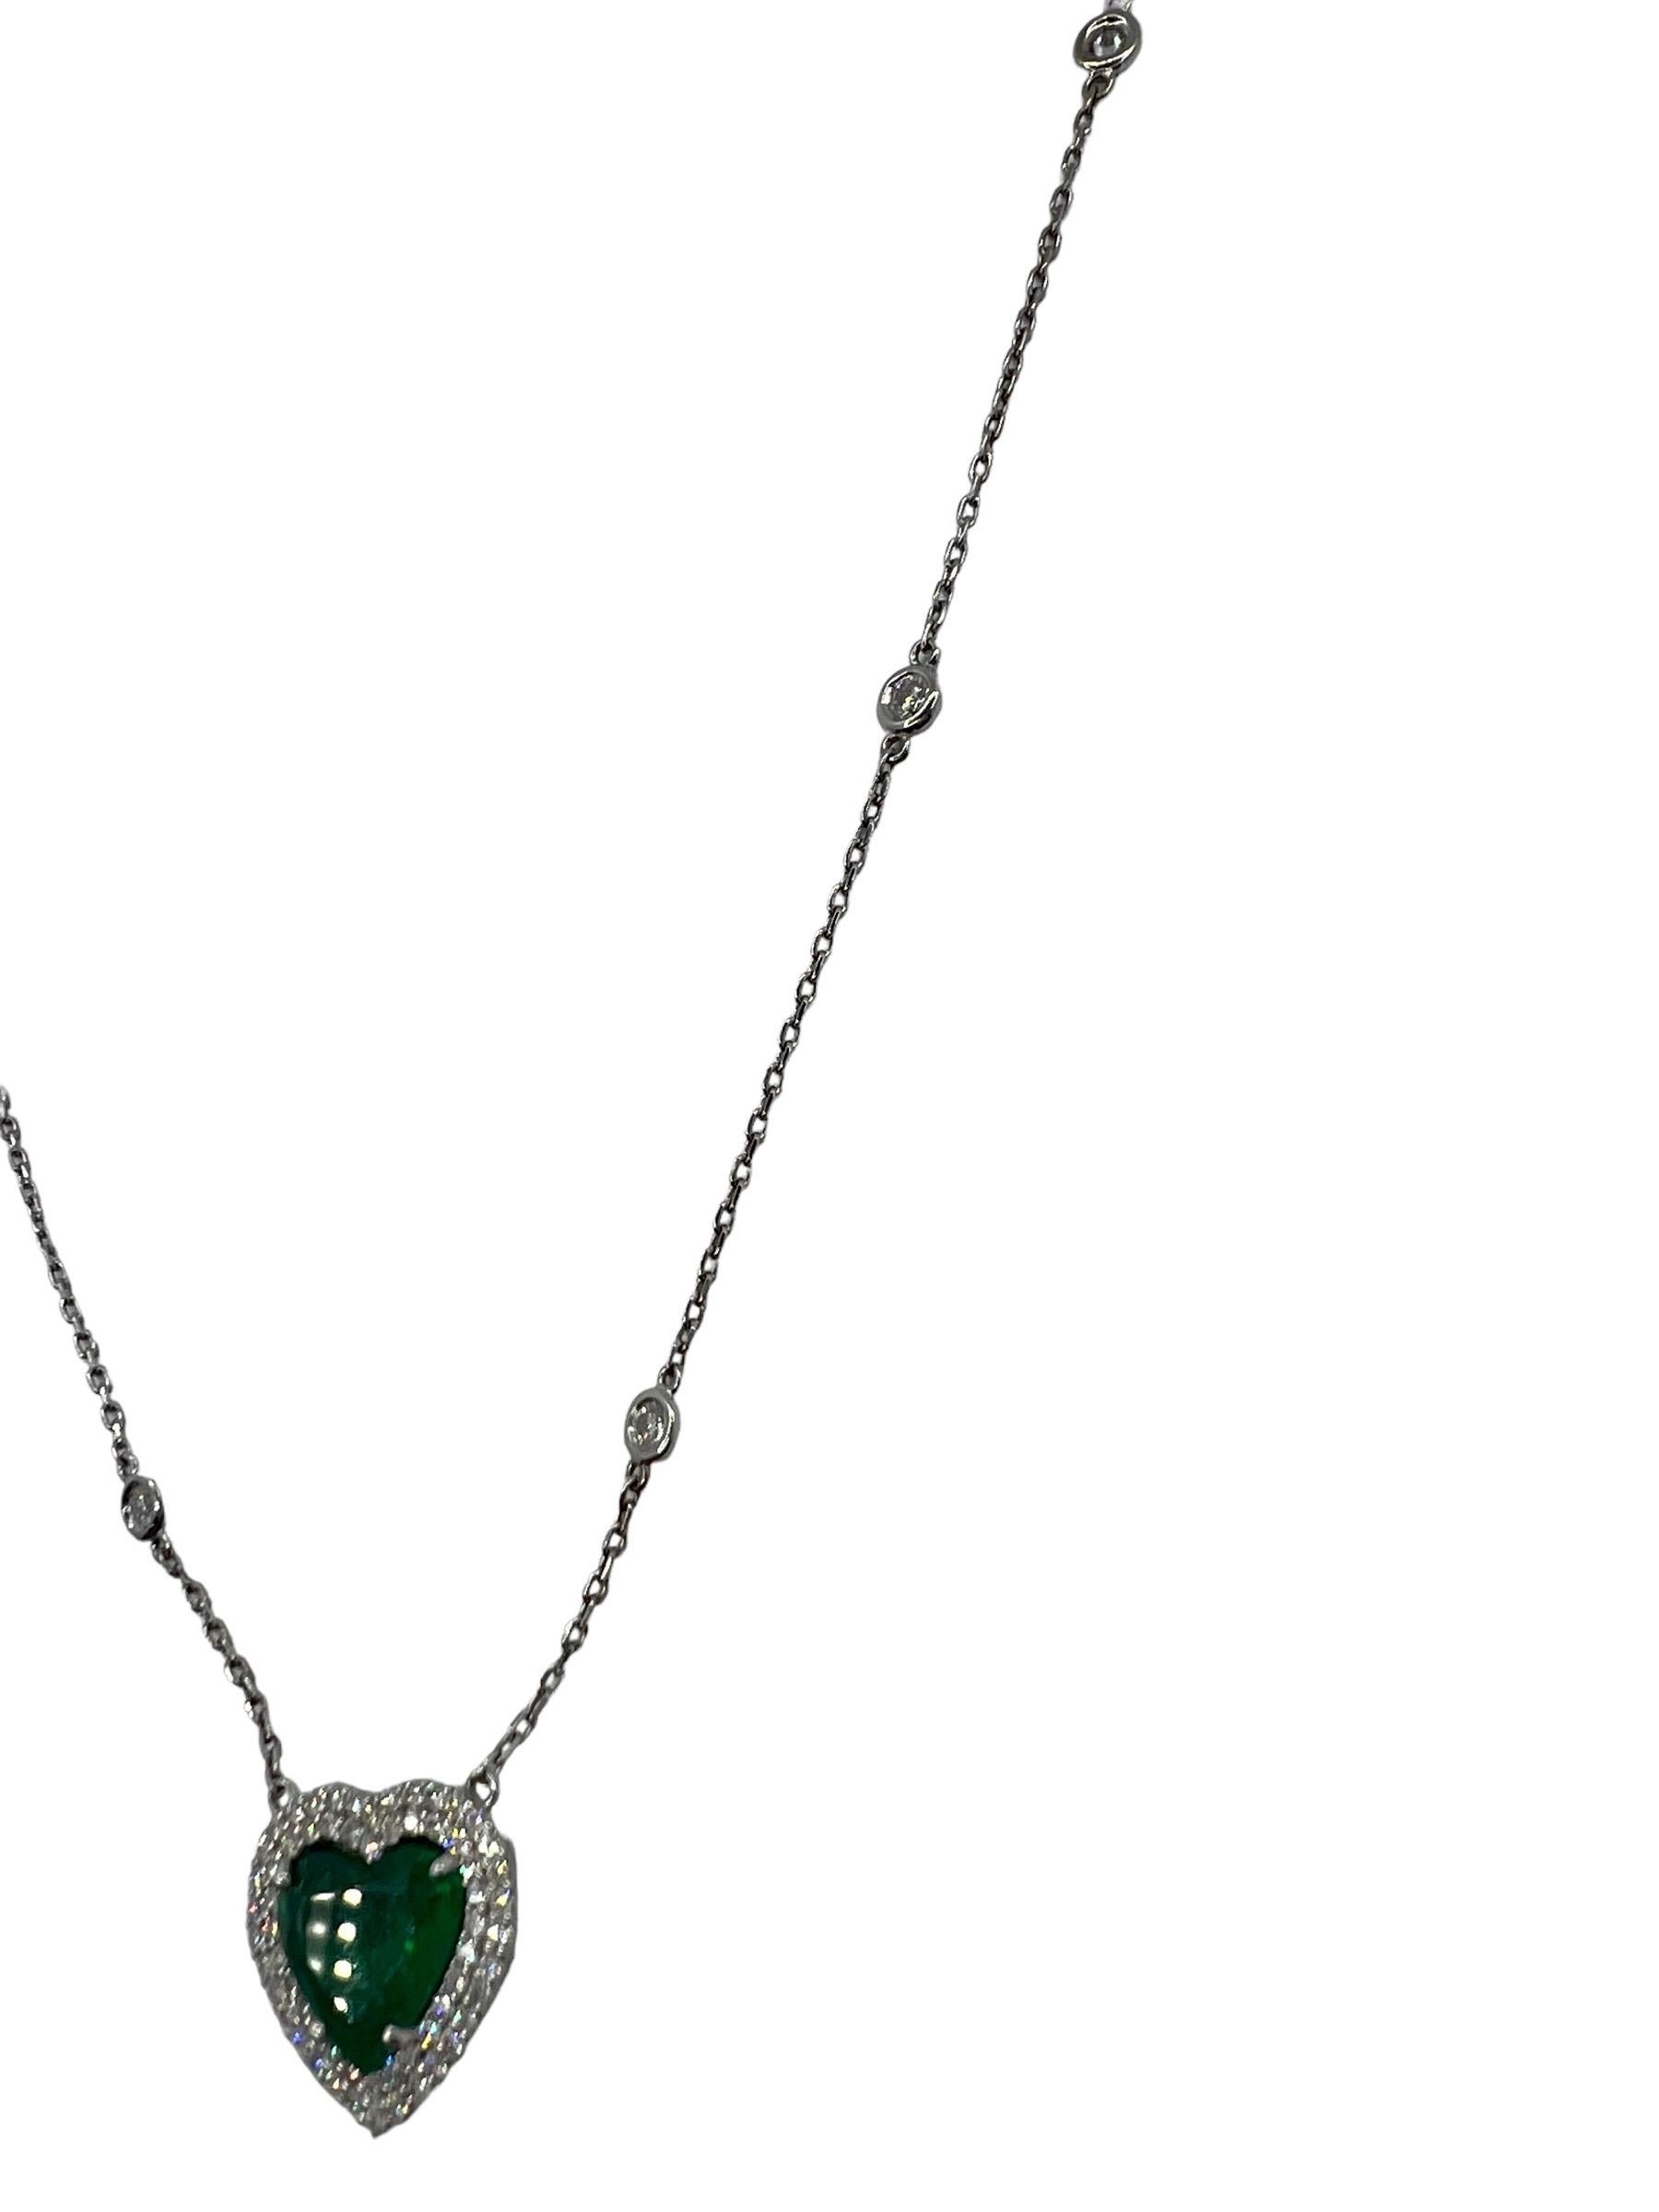 GIA Certified 2.56cts heart cut Emerald set in an 18k white gold Double Diamond Halo. On a Diamonds by the yard chain. 10 diamonds on a 14k white gold Chain. GIA certification is in photos with additional details. 1.50 ctw in Diamonds. Necklace